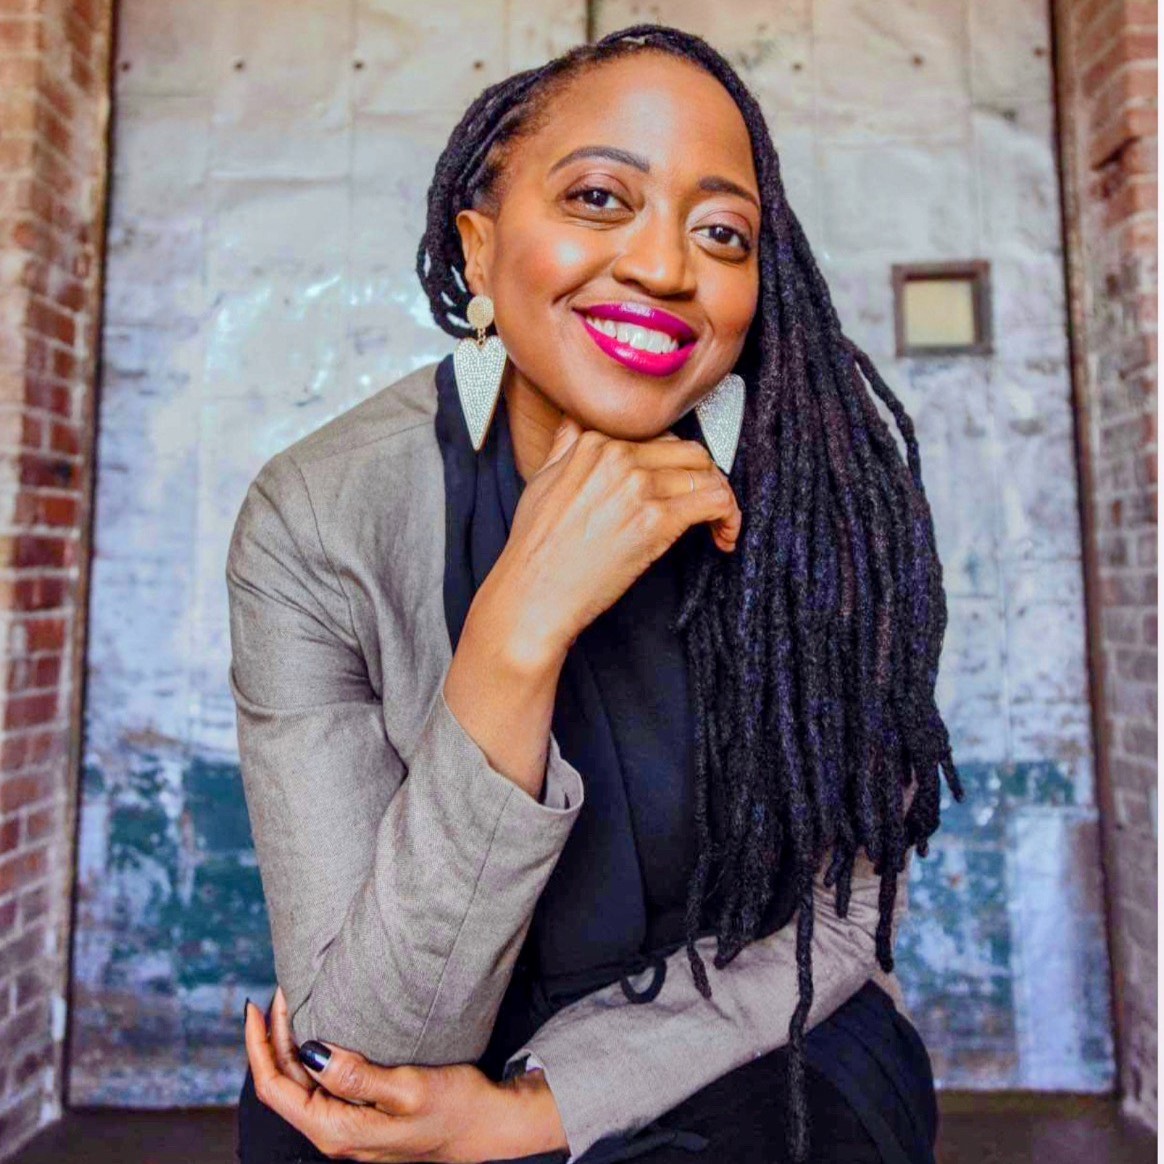 a smiling Black woman with heart-shaped earrings, long locs, blazer, and scarf in front of a steel door bordered by brick walls